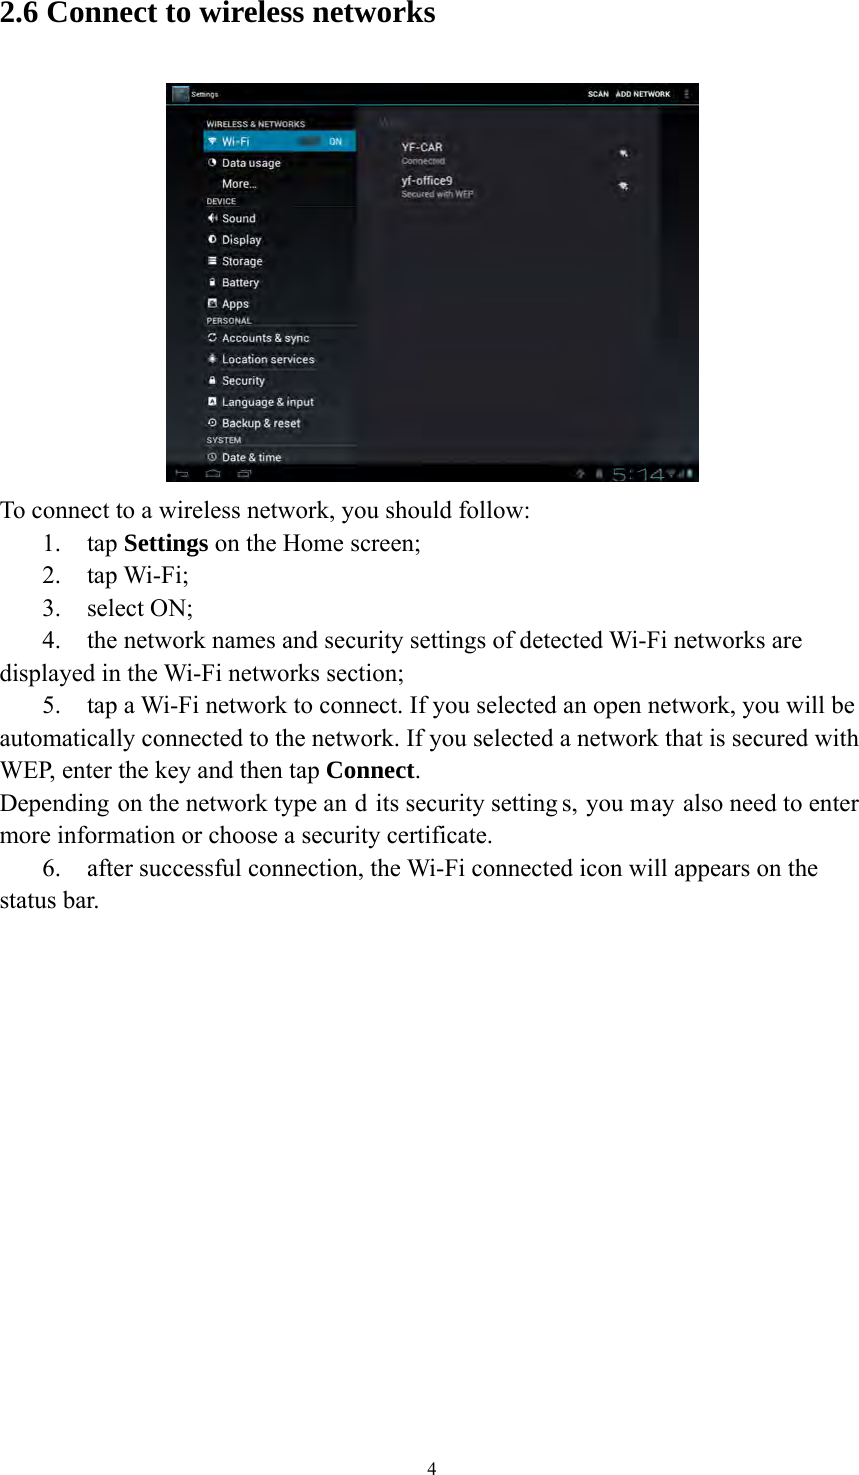 4 2.6 Connect to wireless networks  To connect to a wireless network, you should follow:   1. tap Settings on the Home screen; 2. tap Wi-Fi; 3. select ON; 4. the network names and security settings of detected Wi-Fi networks are displayed in the Wi-Fi networks section; 5. tap a Wi-Fi network to connect. If you selected an open network, you will be automatically connected to the network. If you selected a network that is secured with WEP, enter the key and then tap Connect. Depending on the network type an d its security setting s, you may also need to enter more information or choose a security certificate. 6. after successful connection, the Wi-Fi connected icon will appears on the status bar.    